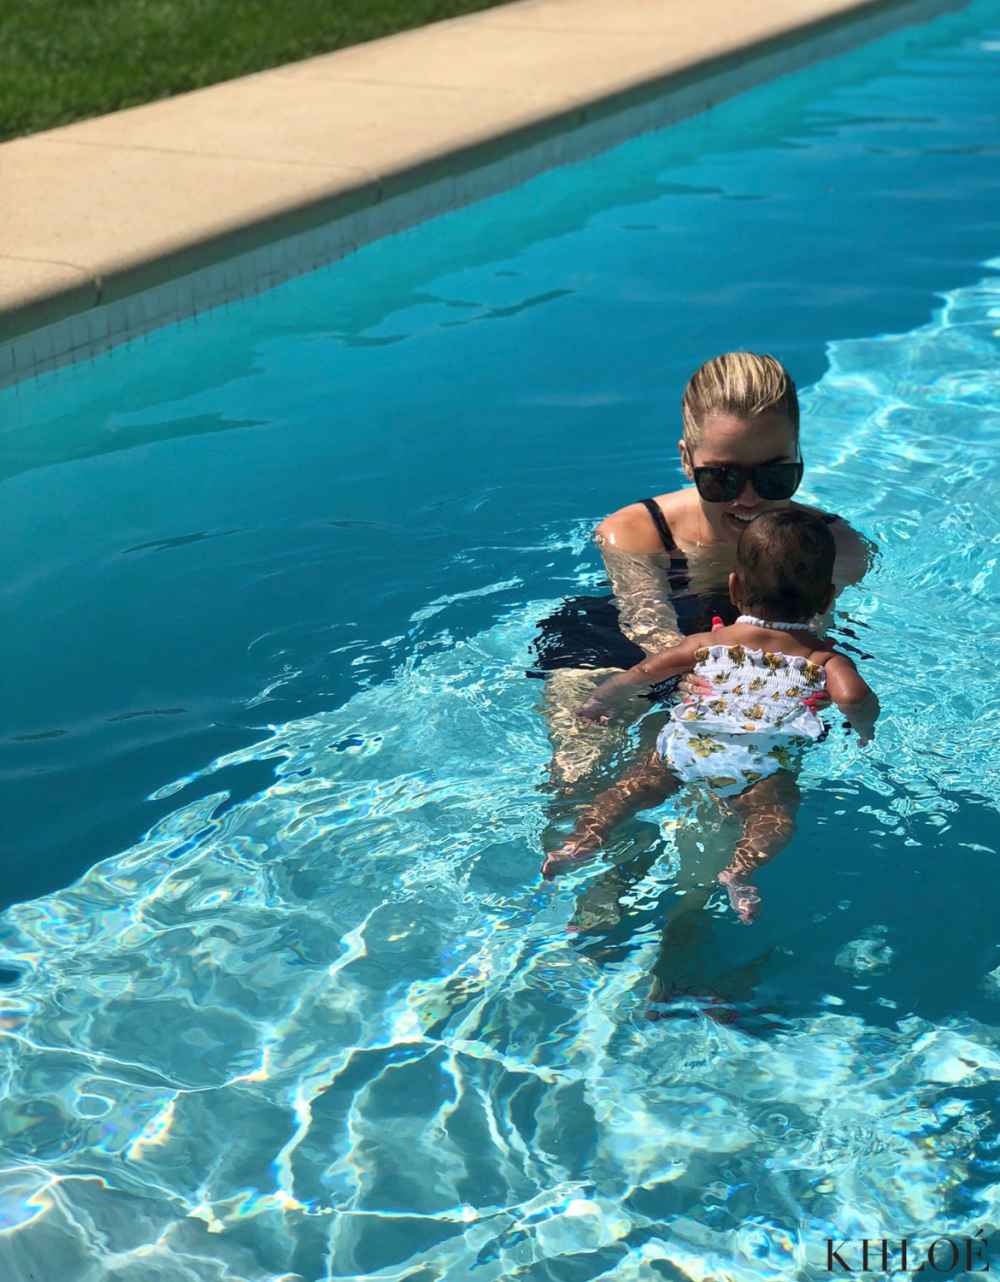 Khloe Kardashian Gushes Over Baby True's First Swim Lesson, Looks Happy in Vacation Photos With Tristan Thompson